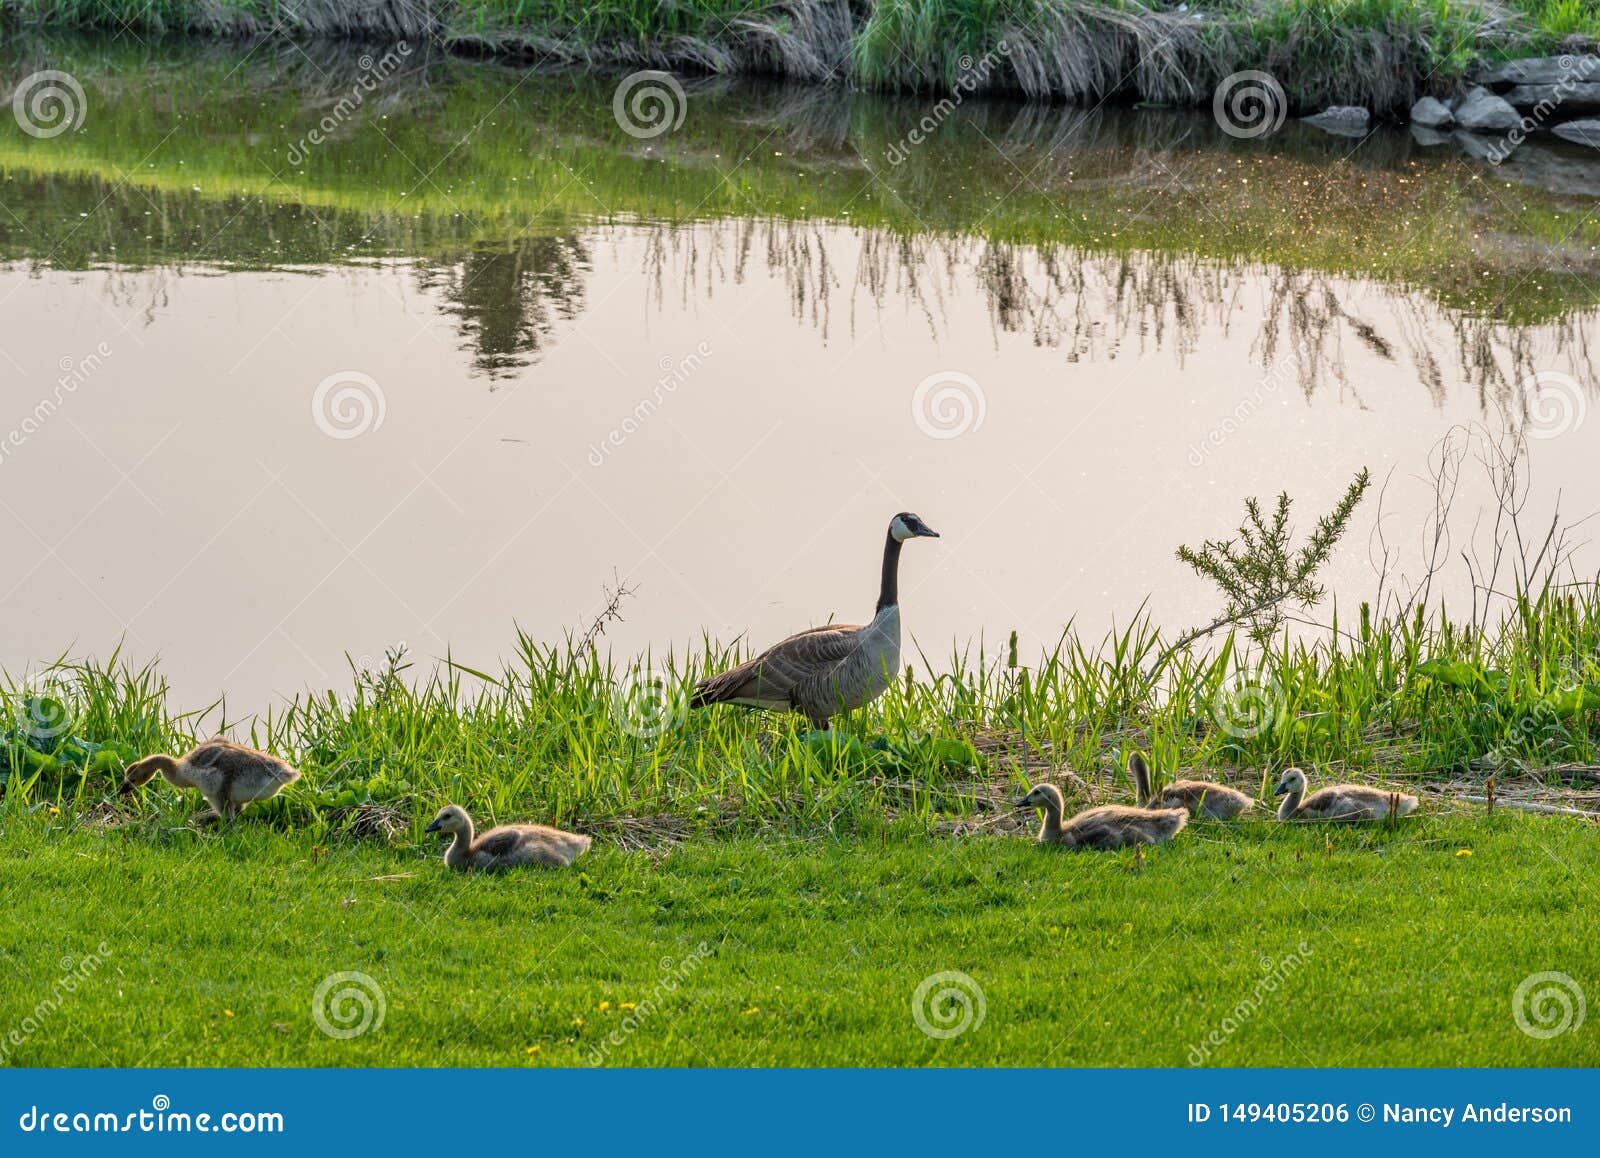 canada goose with clutch of goslings beside creek on the elmwood golf course in swift current, sk